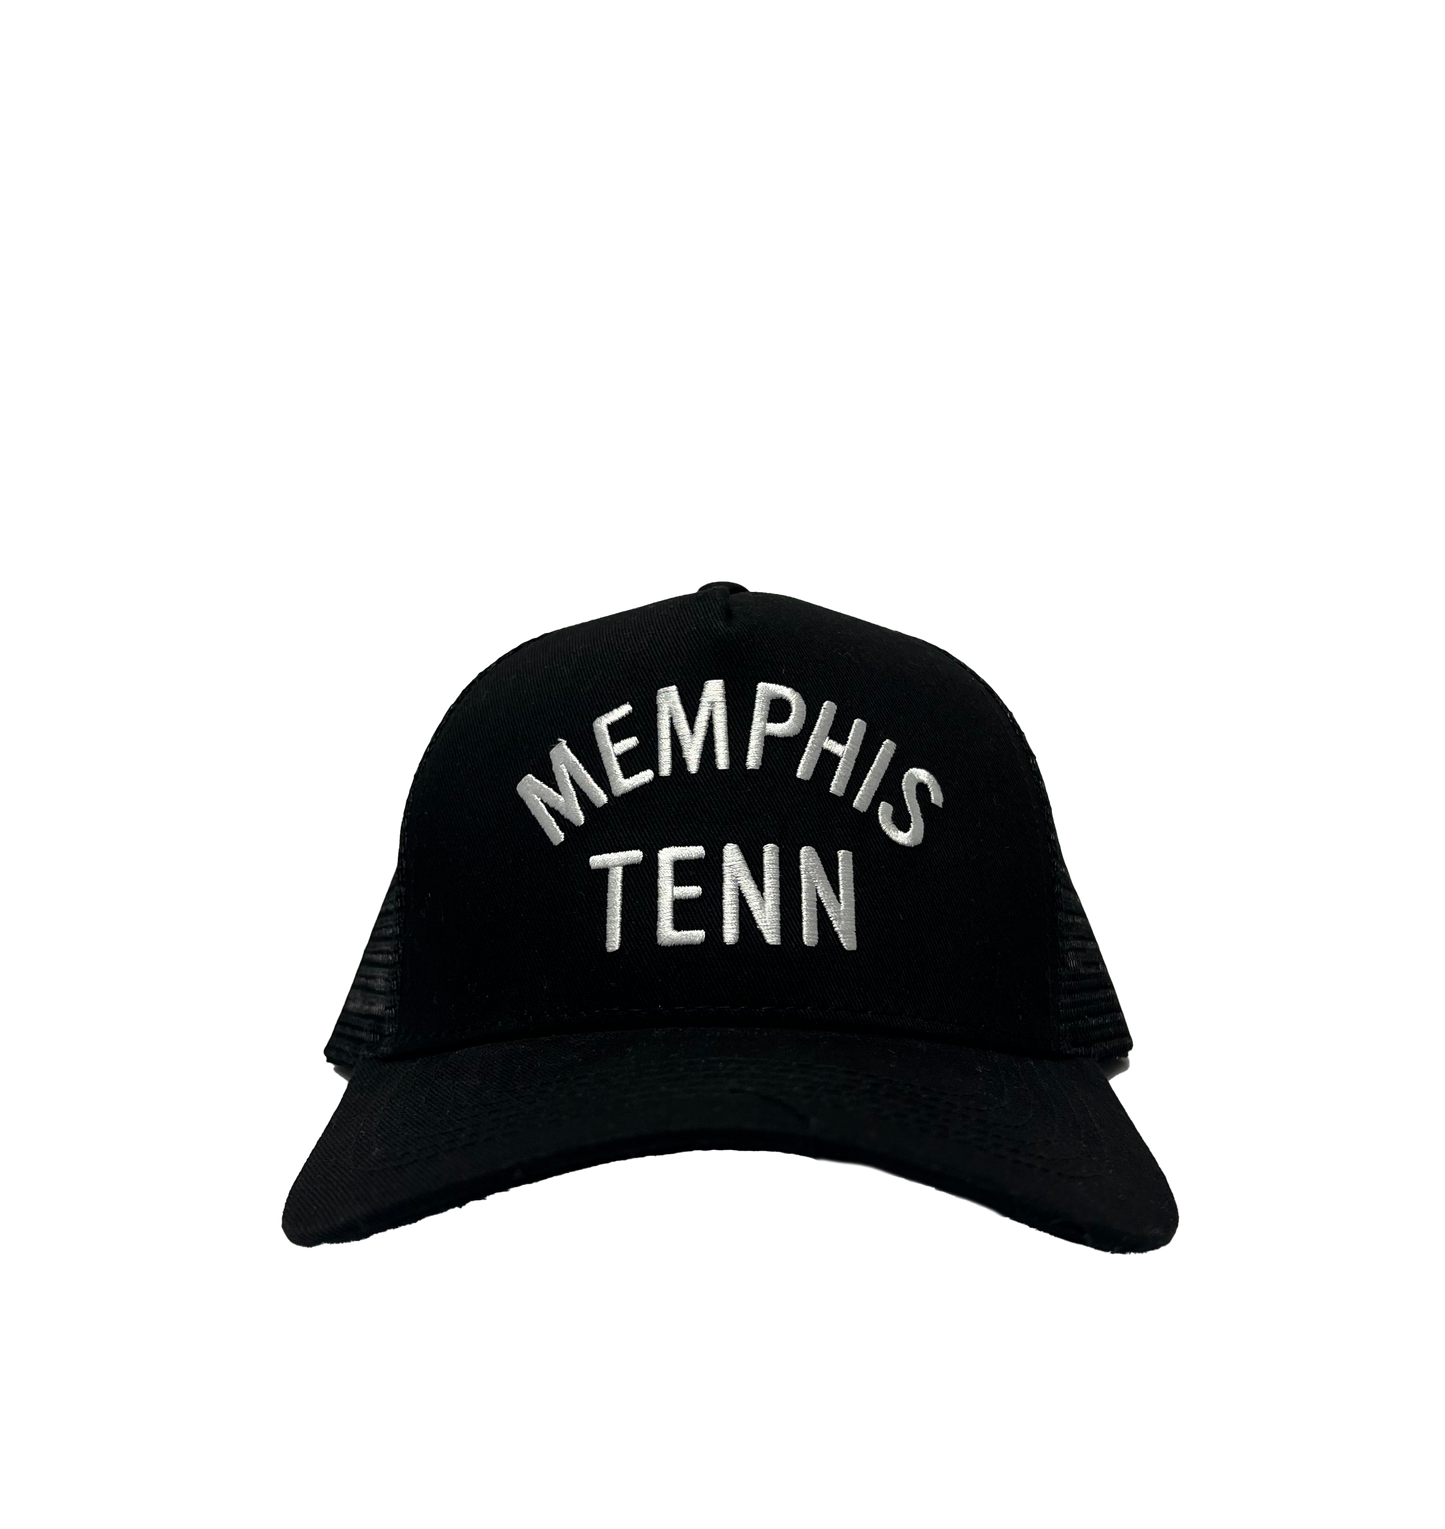 Memphis Tenn Black Trucker Hat with "901" embroidered in white letters, set against a striped gray background from Choose901 Merch Shop.